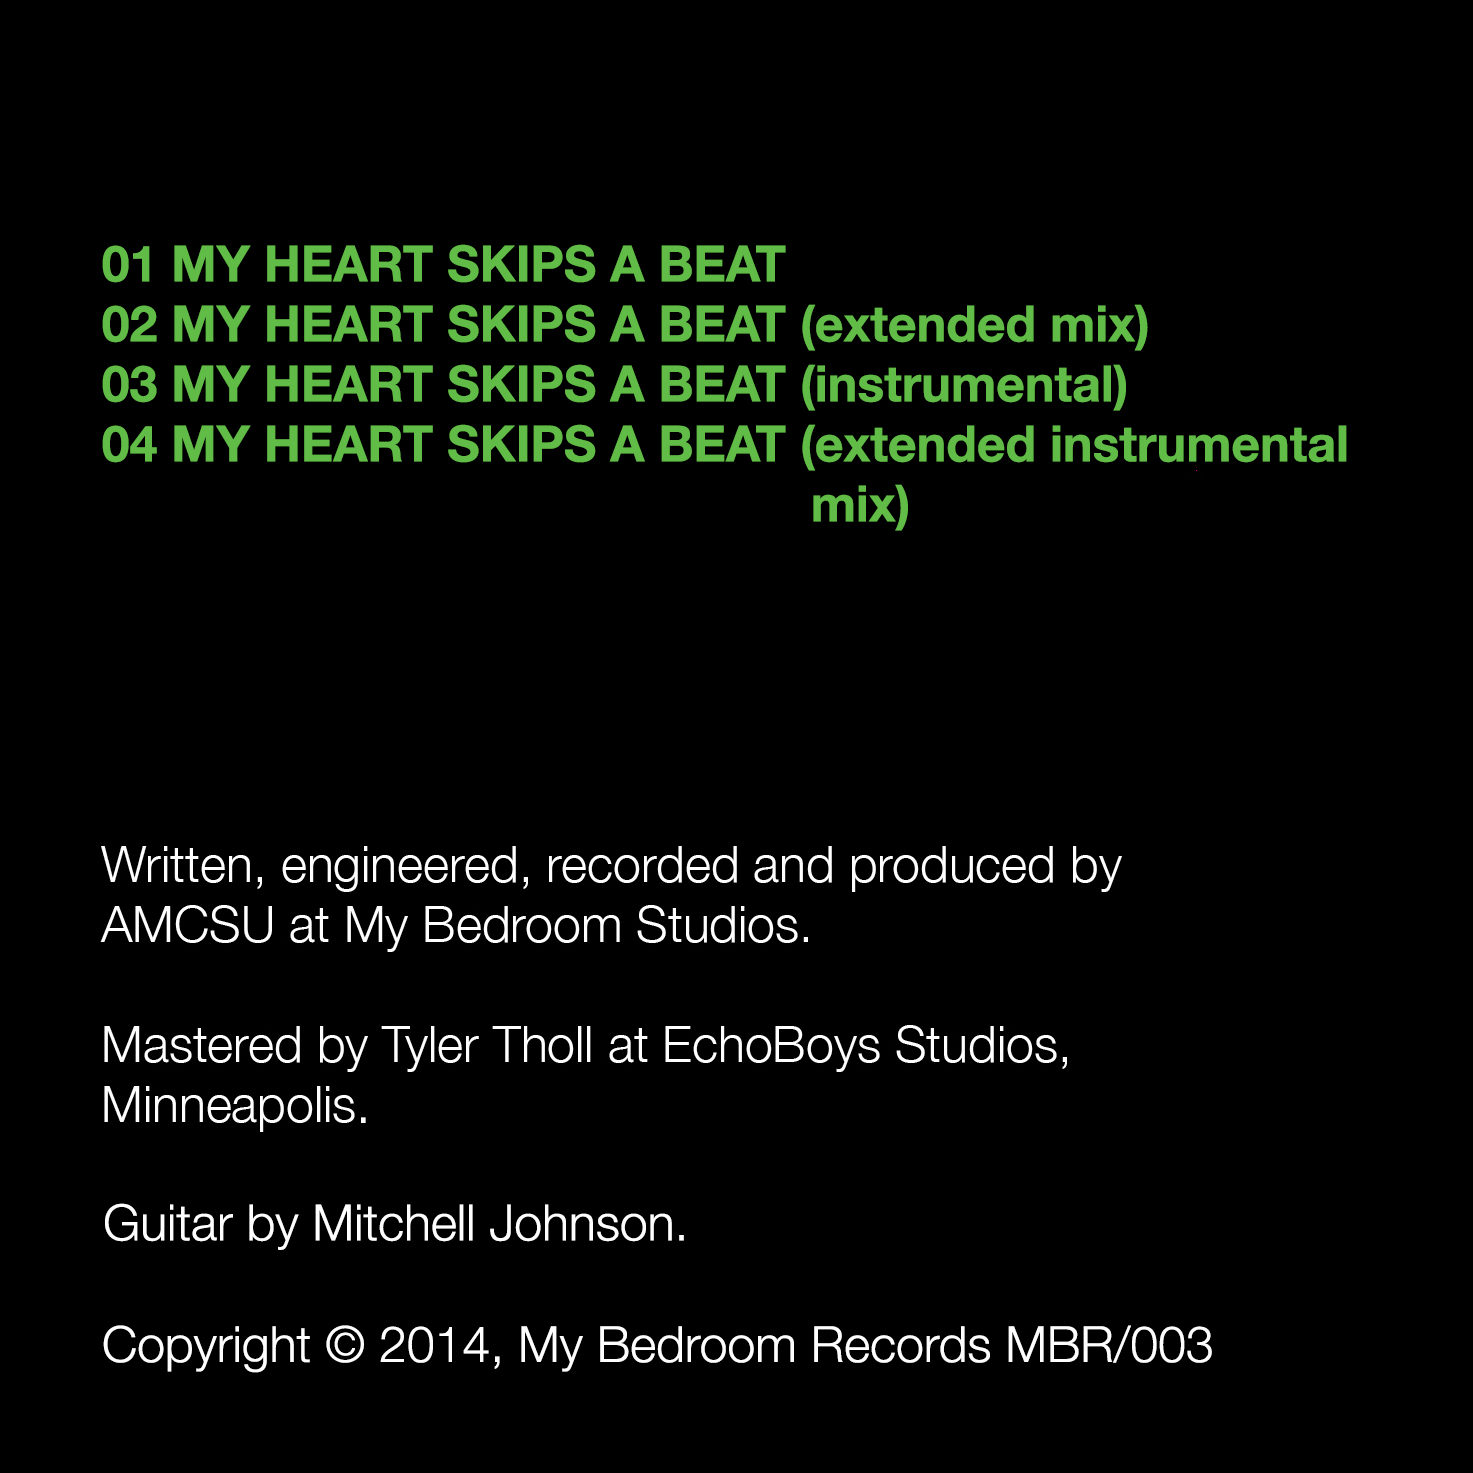 My Heart Skips a Beat back cover